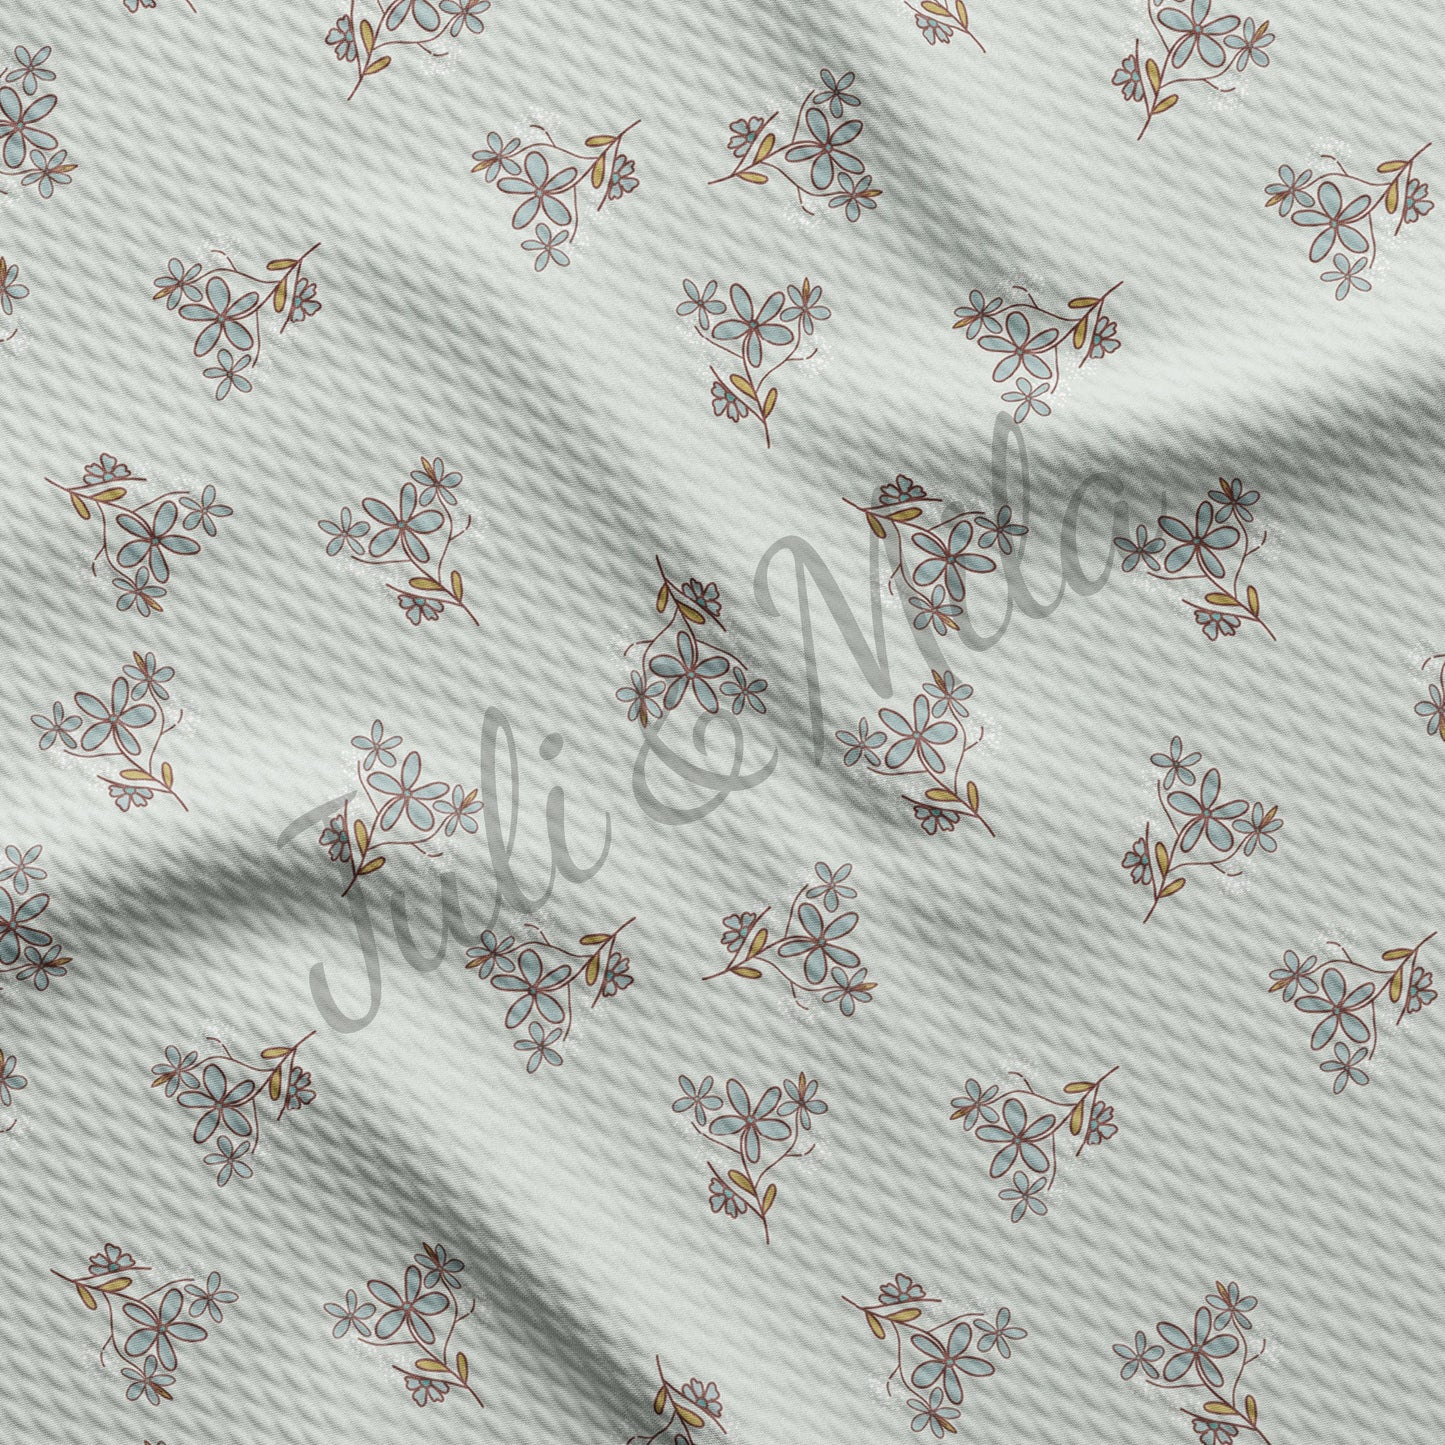 Floral Bullet Textured Fabric Floral68